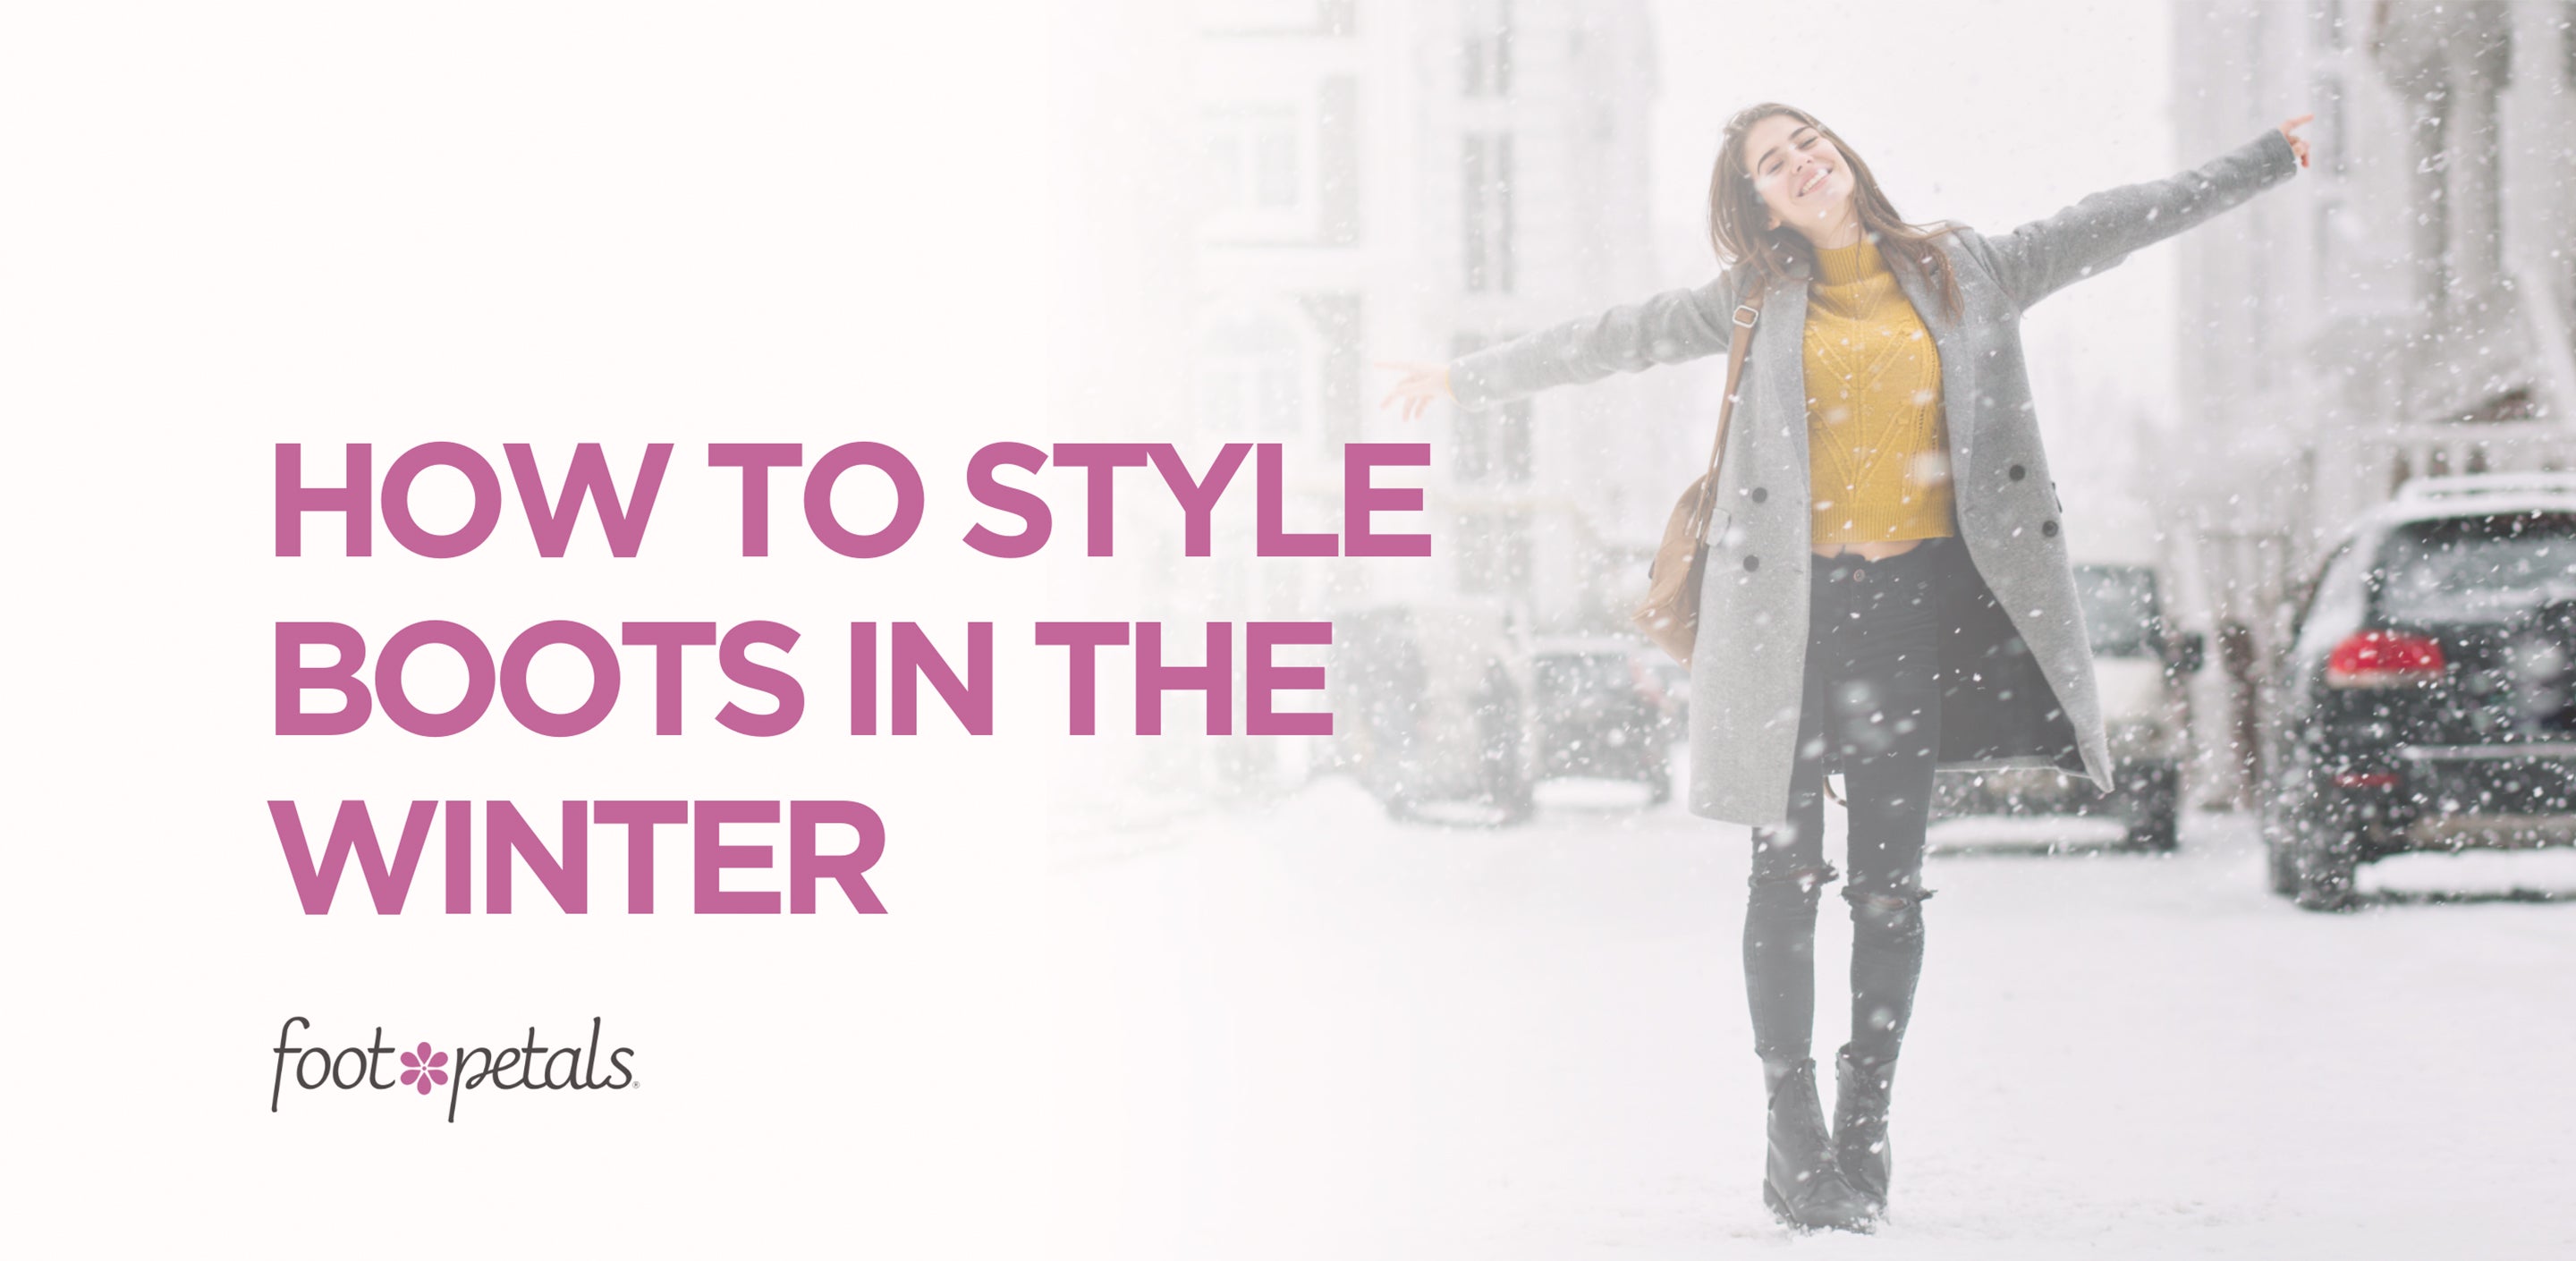 Outfit Ideas  Chic winter outfits, Fashion trends winter, Winter